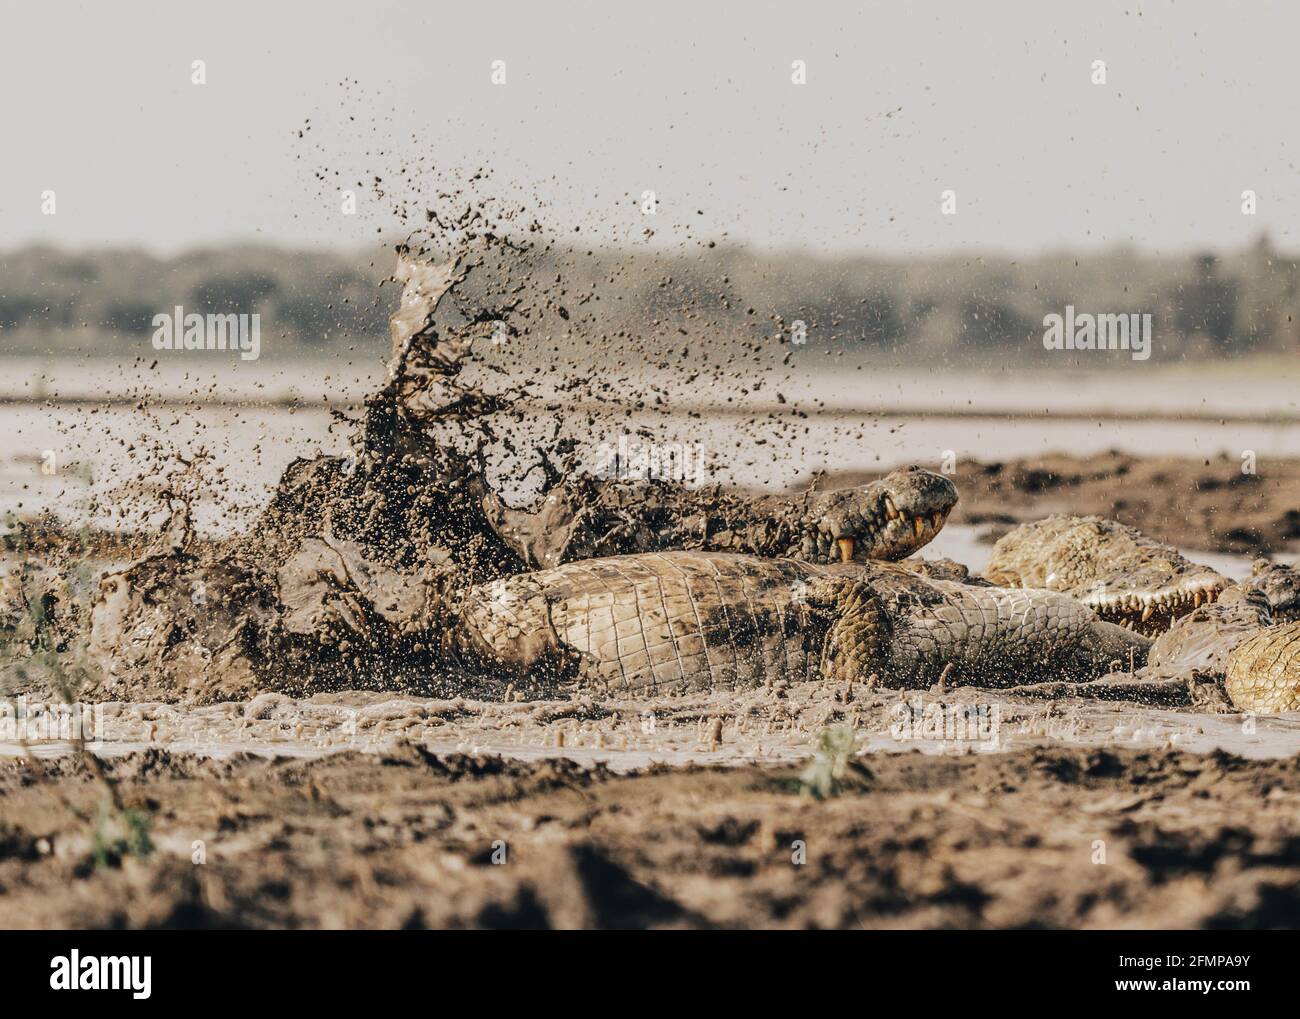 TANZANIA: The crocodiles tussled in the mud over the hyena. THE MOMENT a group of more than SIXTY hungry crocodiles piled on top of each other to grab Stock Photo